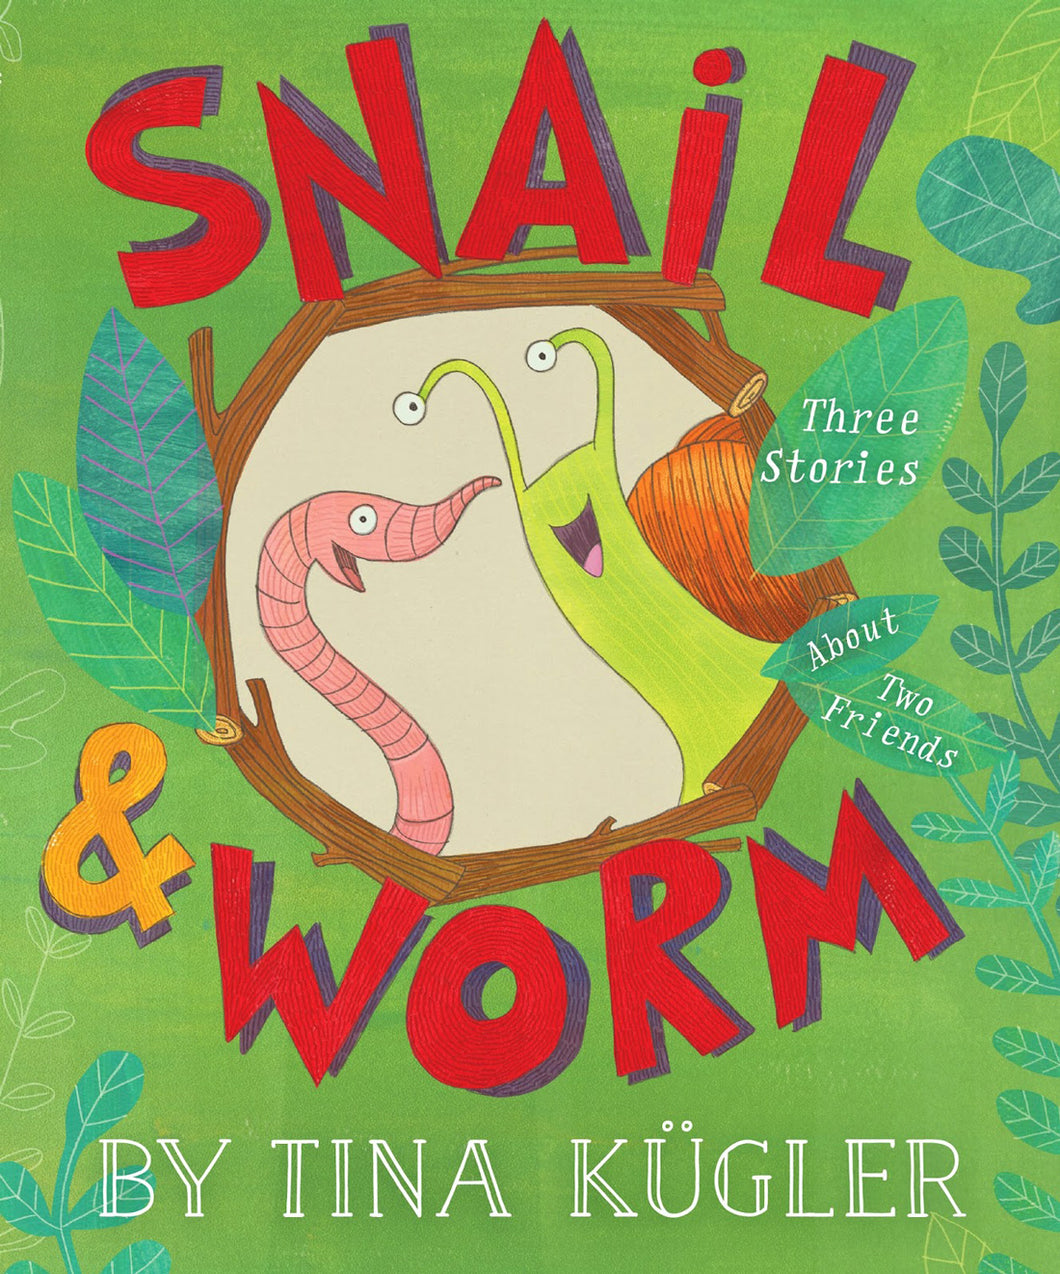 Snail and Worm by Tina Kügler / Hardcover or Paperback - NEW BOOK OR BOOK BUNDLE